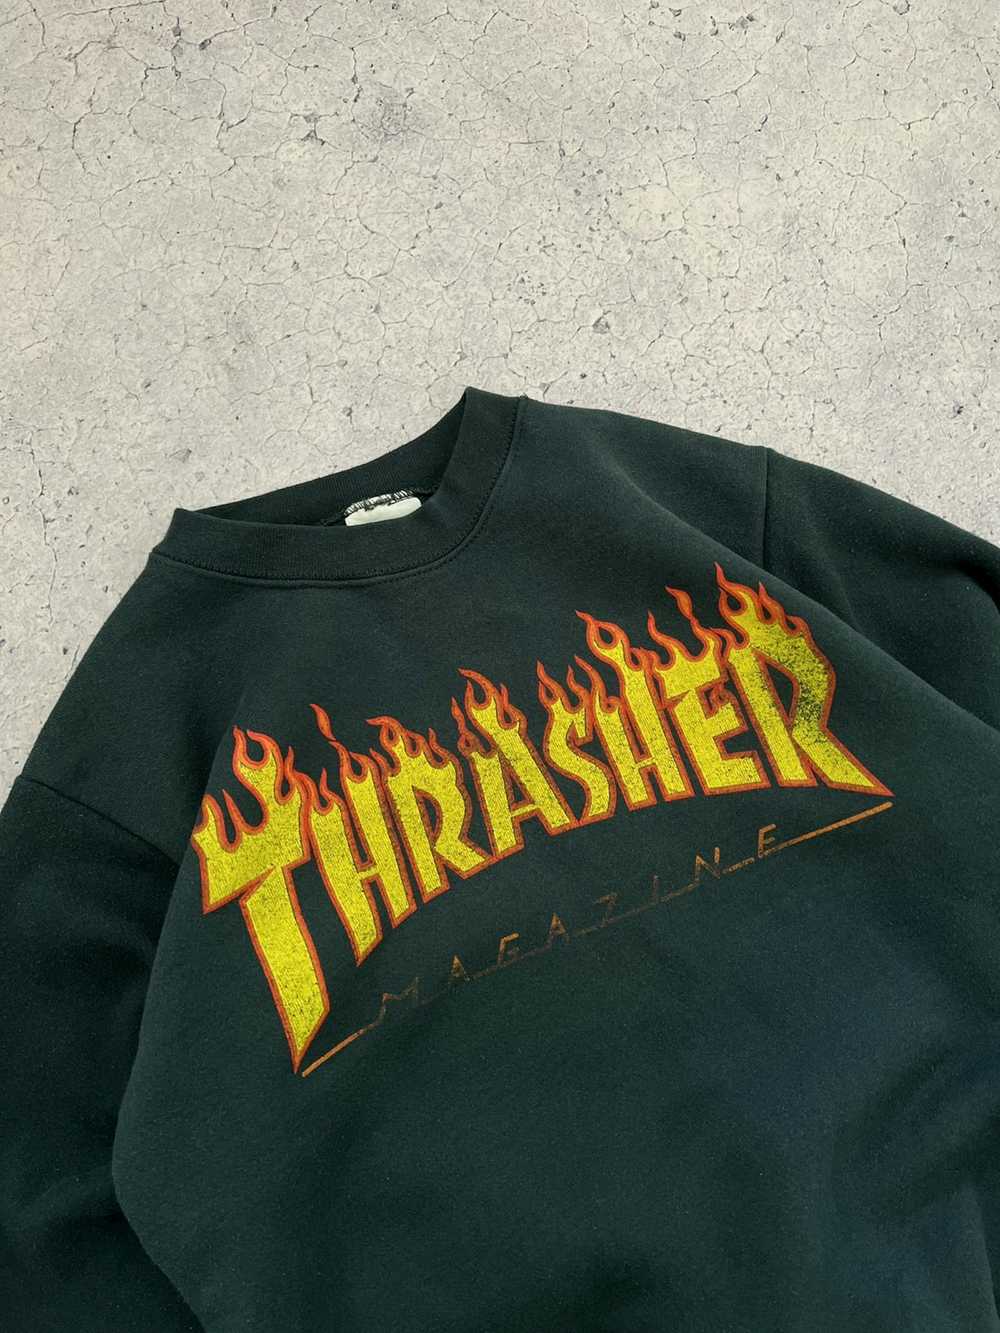 Made In Usa × Thrasher × Vintage ❗️VERY RARE❗️ TH… - image 3